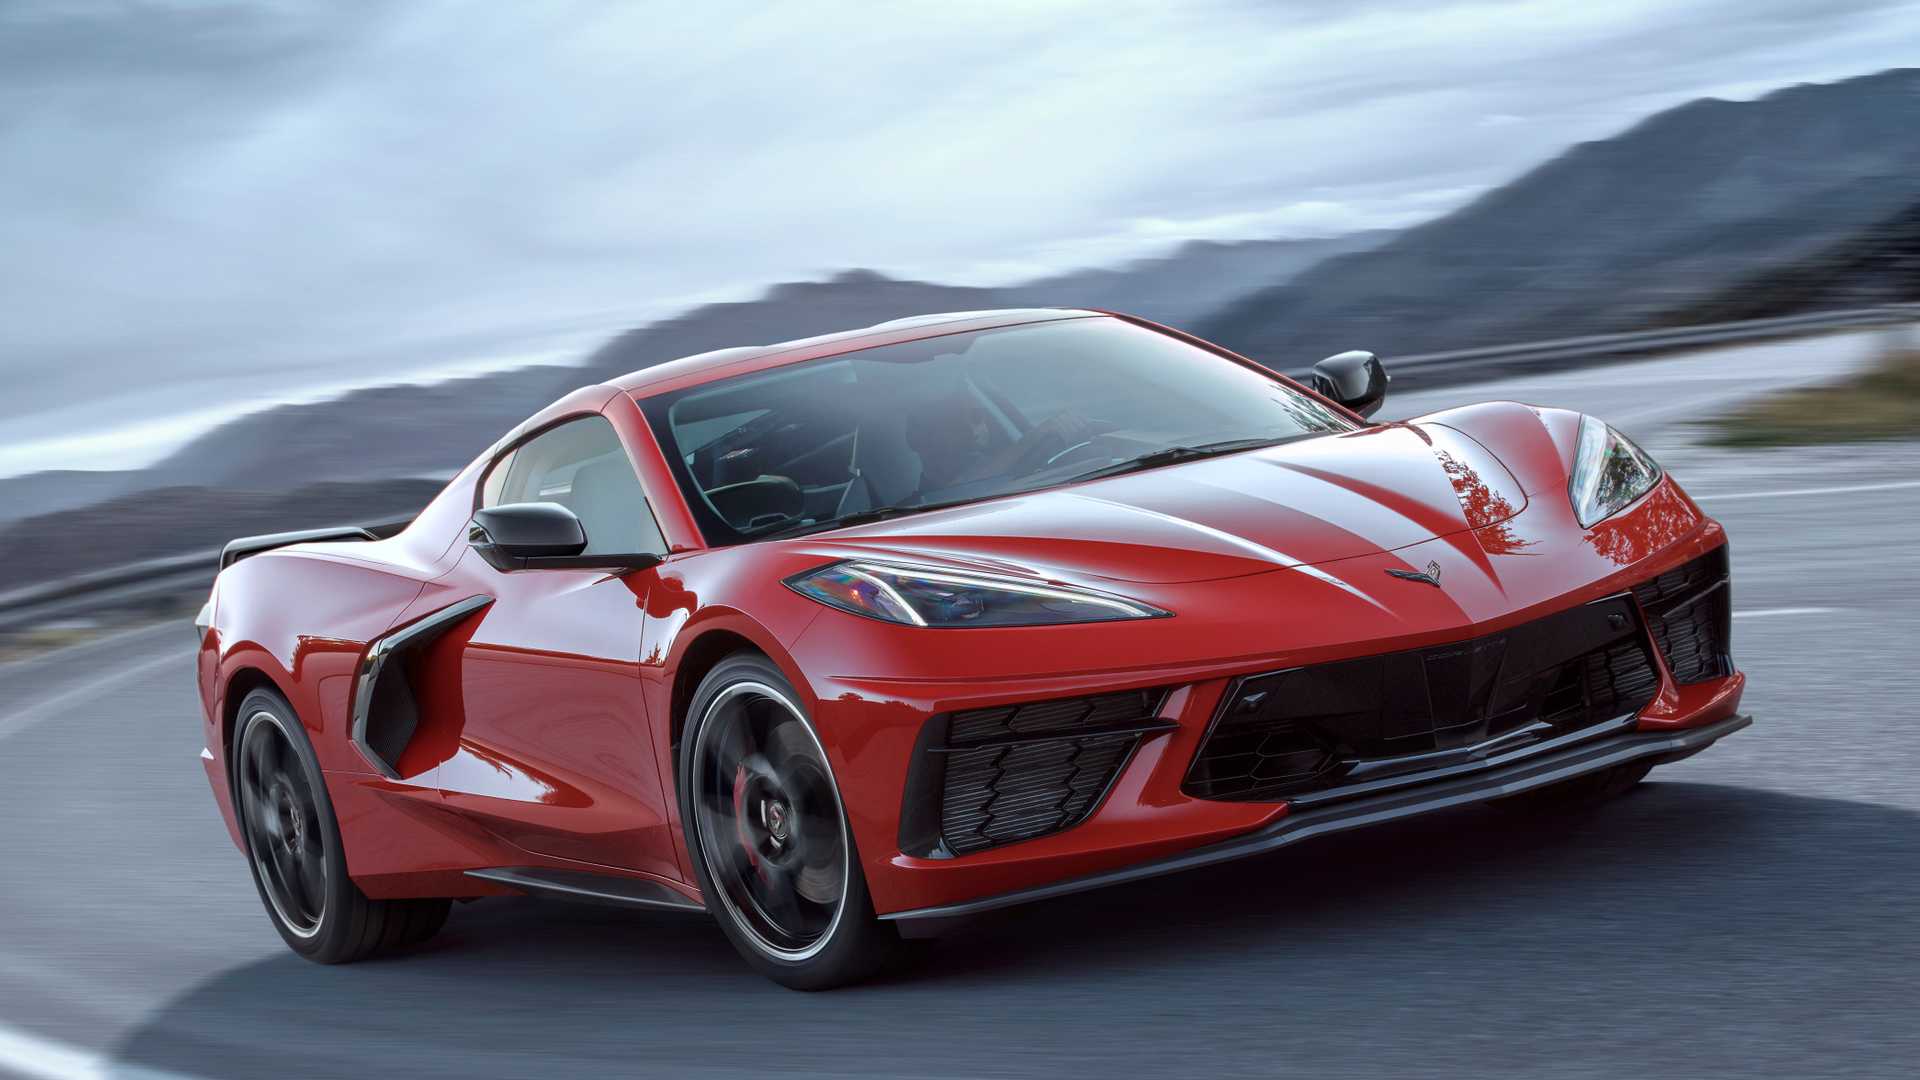 Enter To Win A Corvette Z51 And Help The National Sprint Car